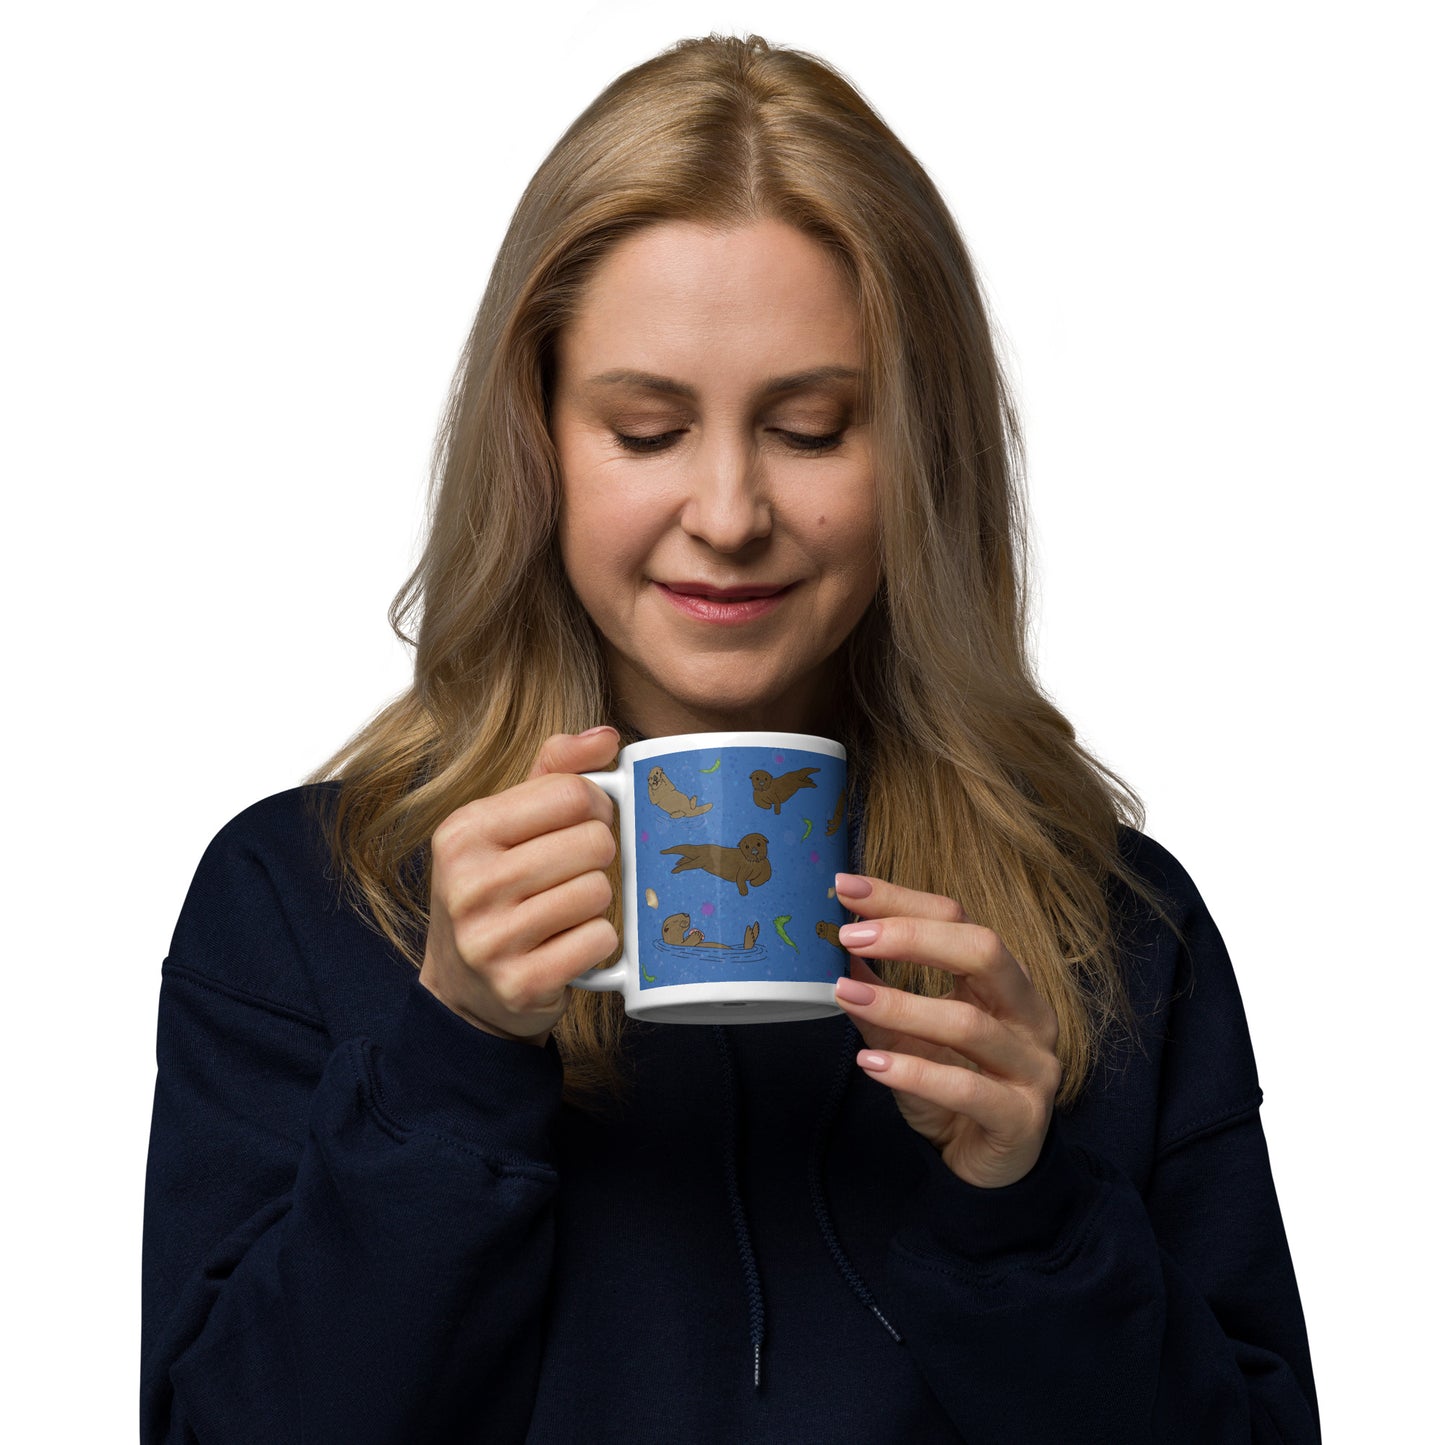 11 ounce white ceramic mug with sea otters on an ocean blue background. Mug is microwave and dishwasher safe. Shown in female model's hands.